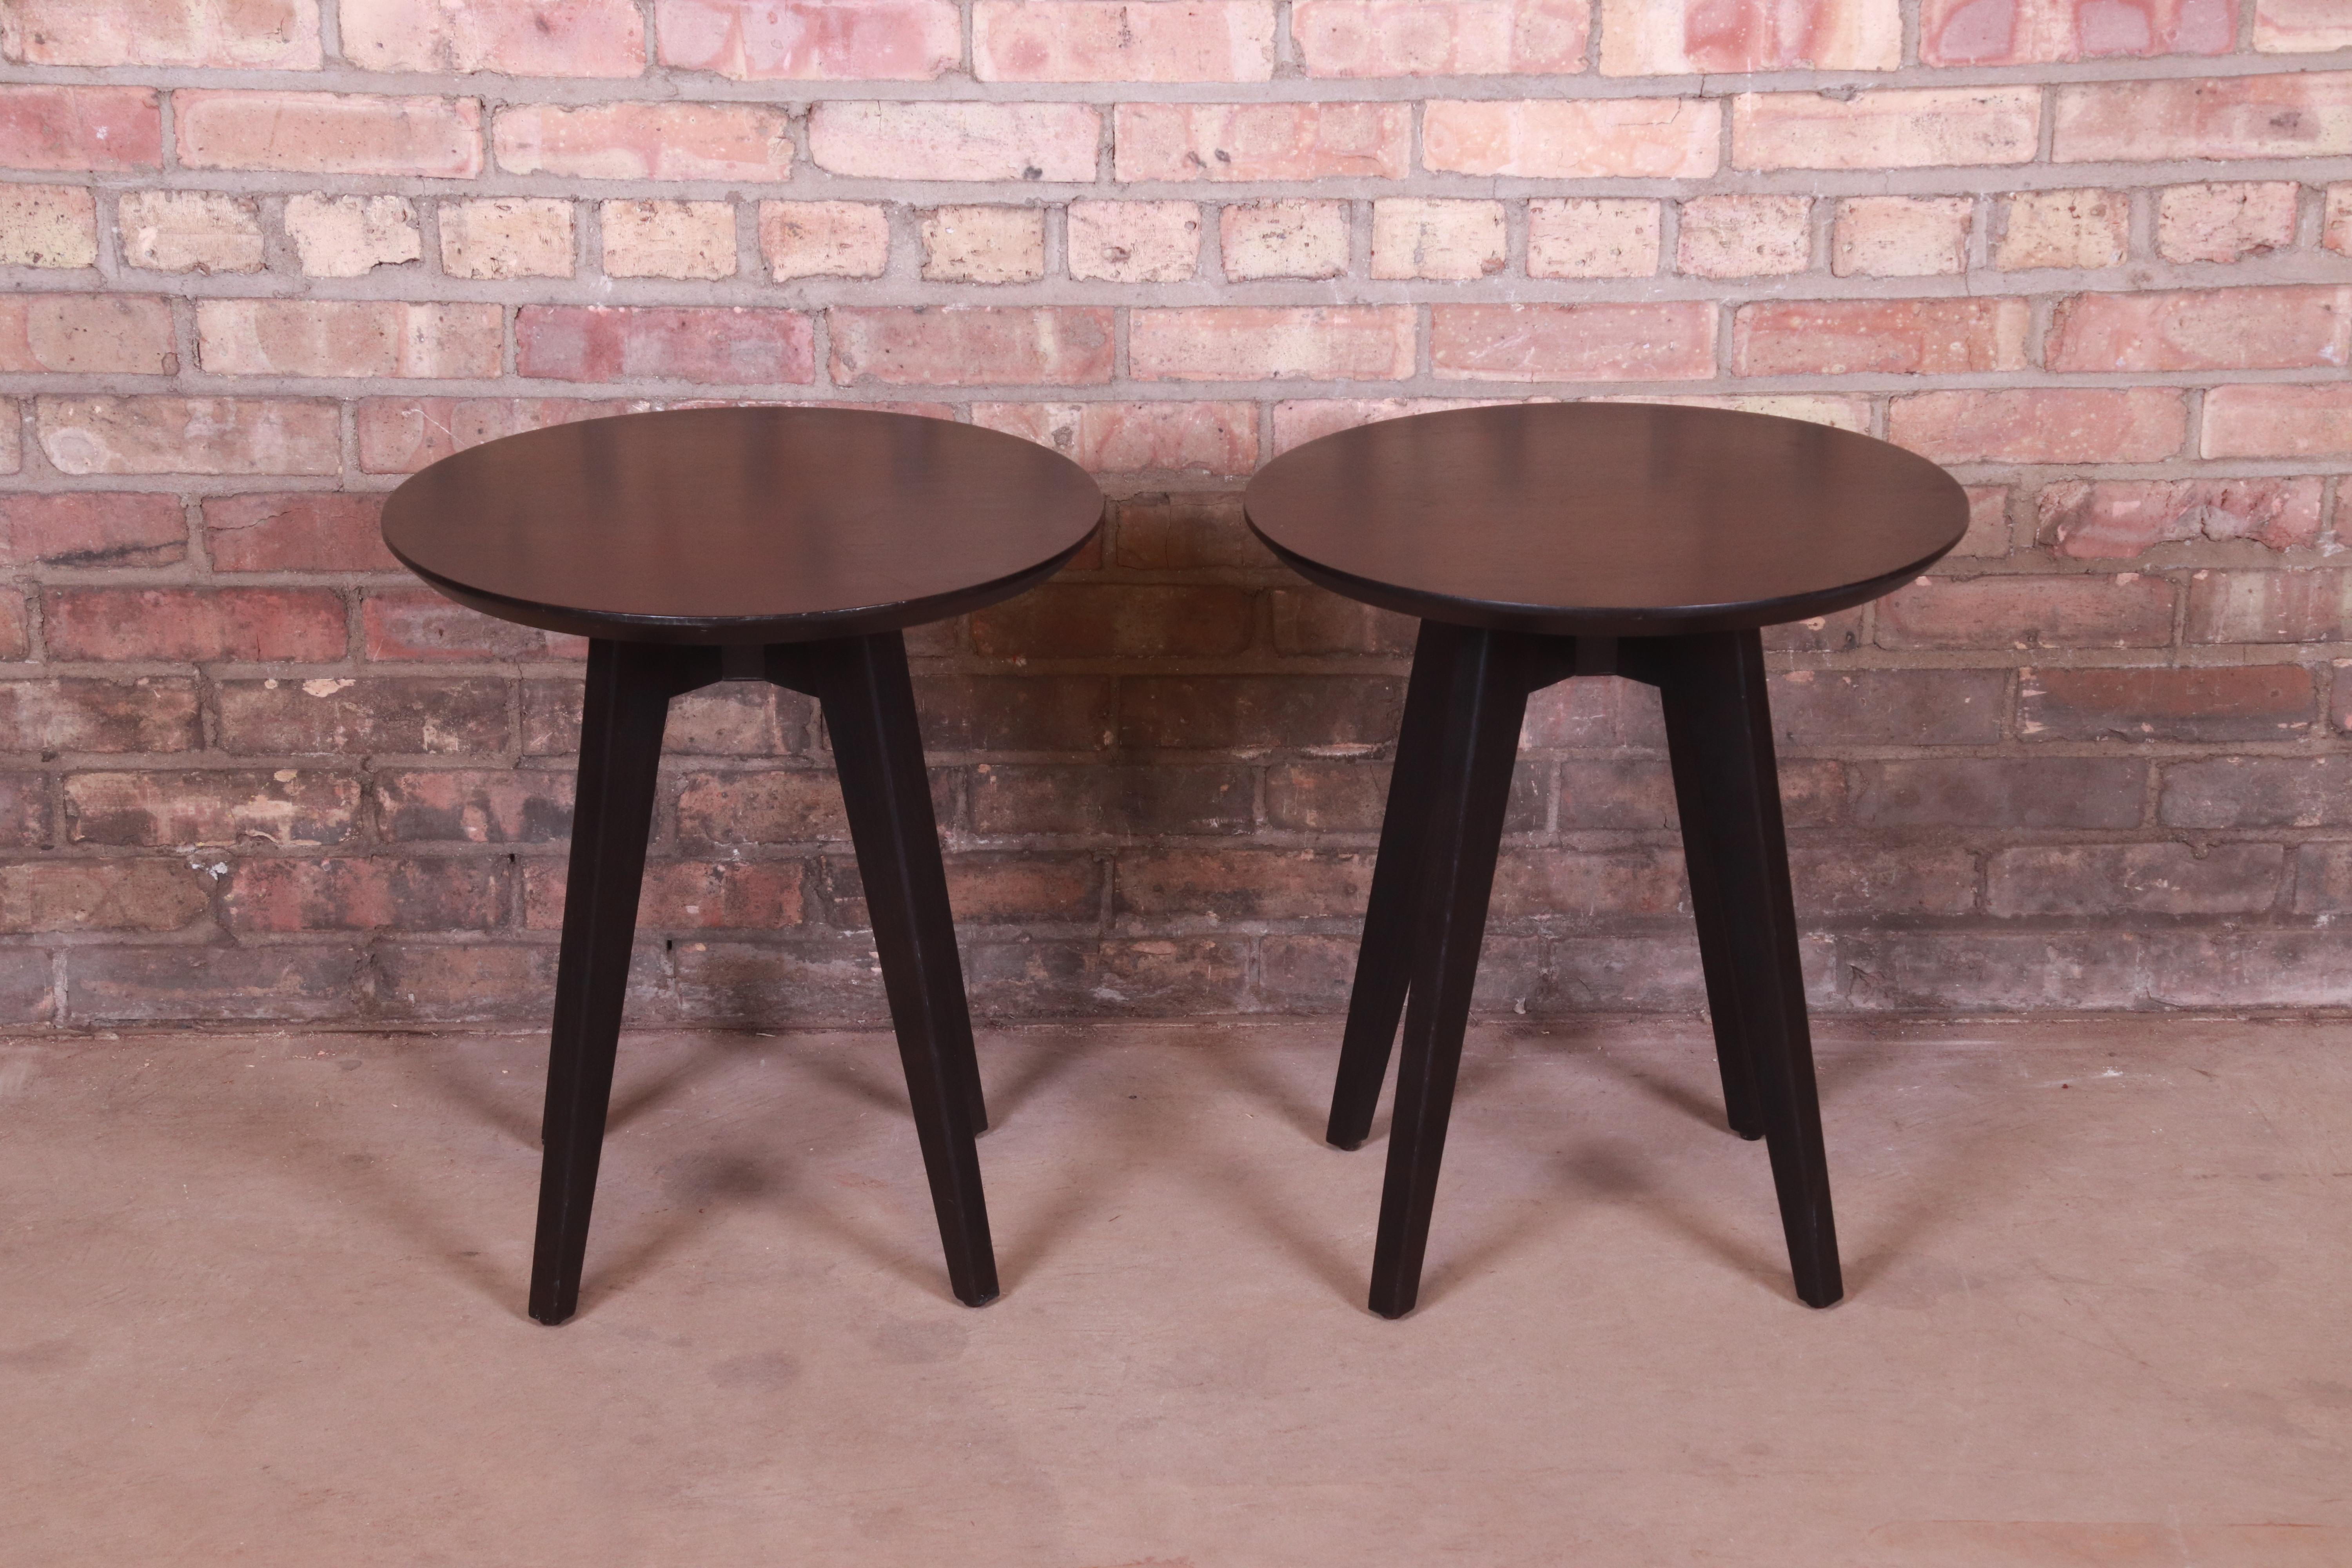 A gorgeous pair of Mid-Century Modern style black lacquered side tables

By Jens Risom for Knoll

USA, 20th century

Measures: 18